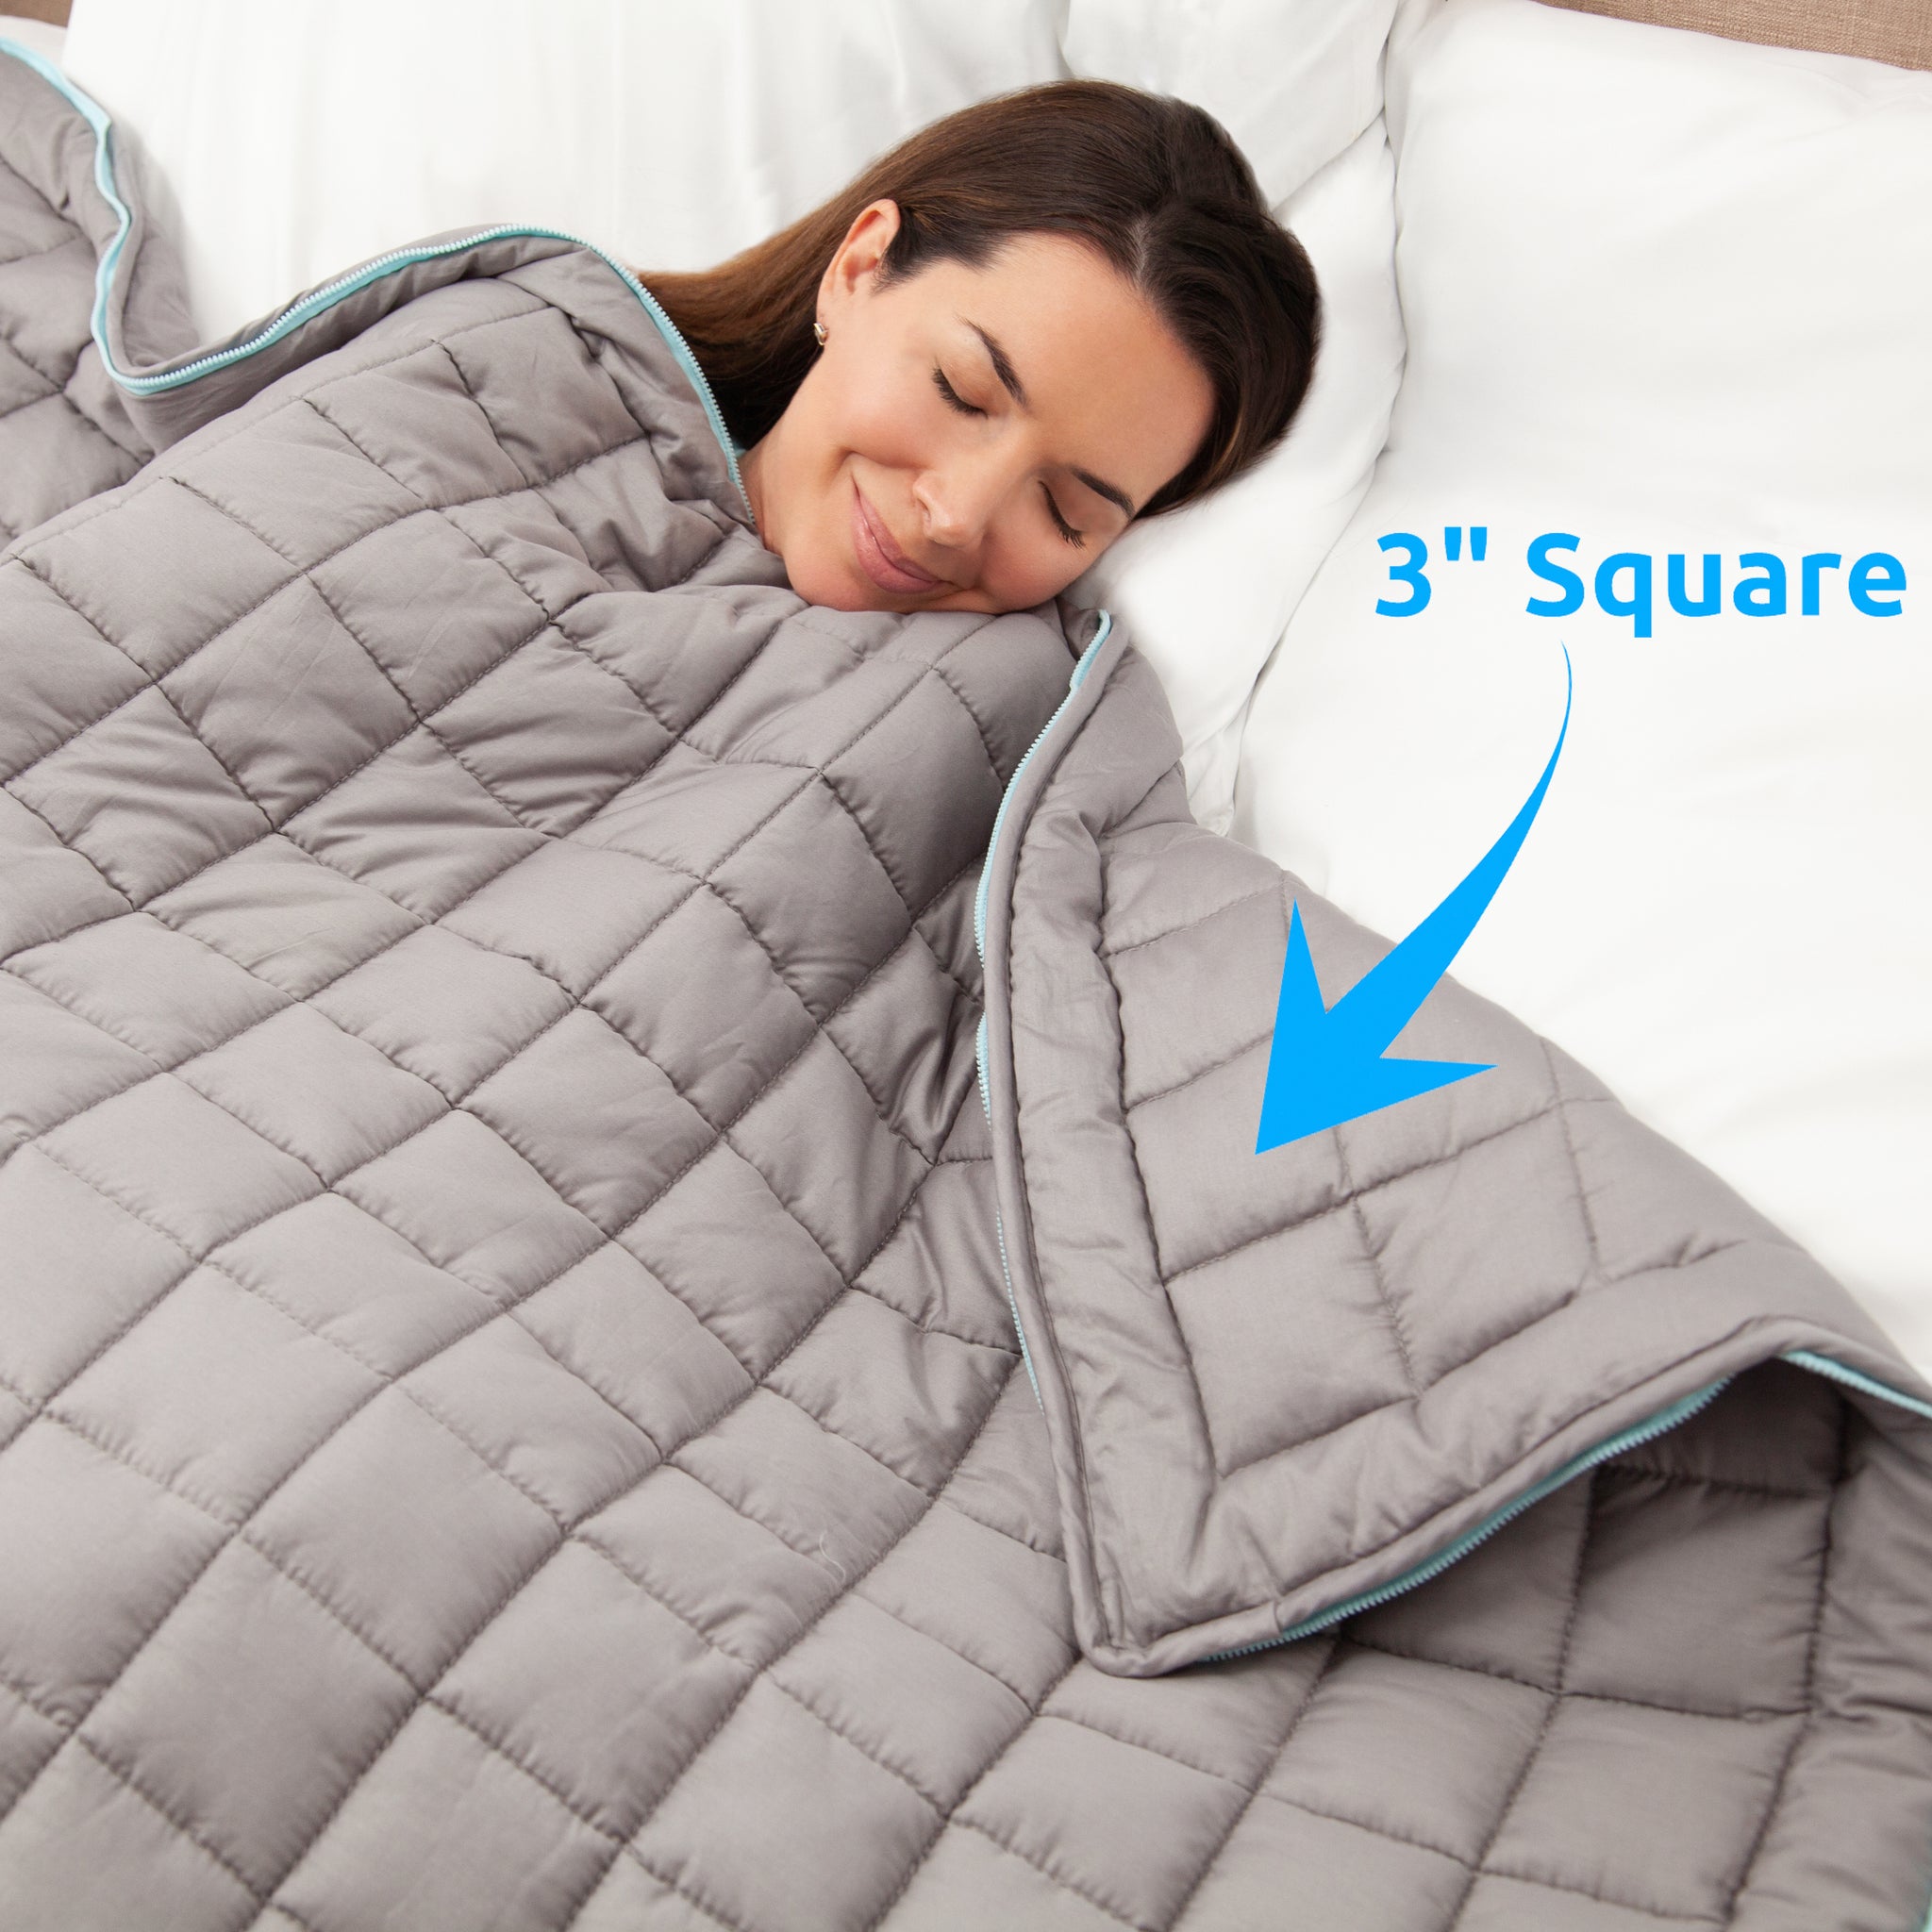 20 lb Weighted Blanket in London Grey with Patented Zipper System